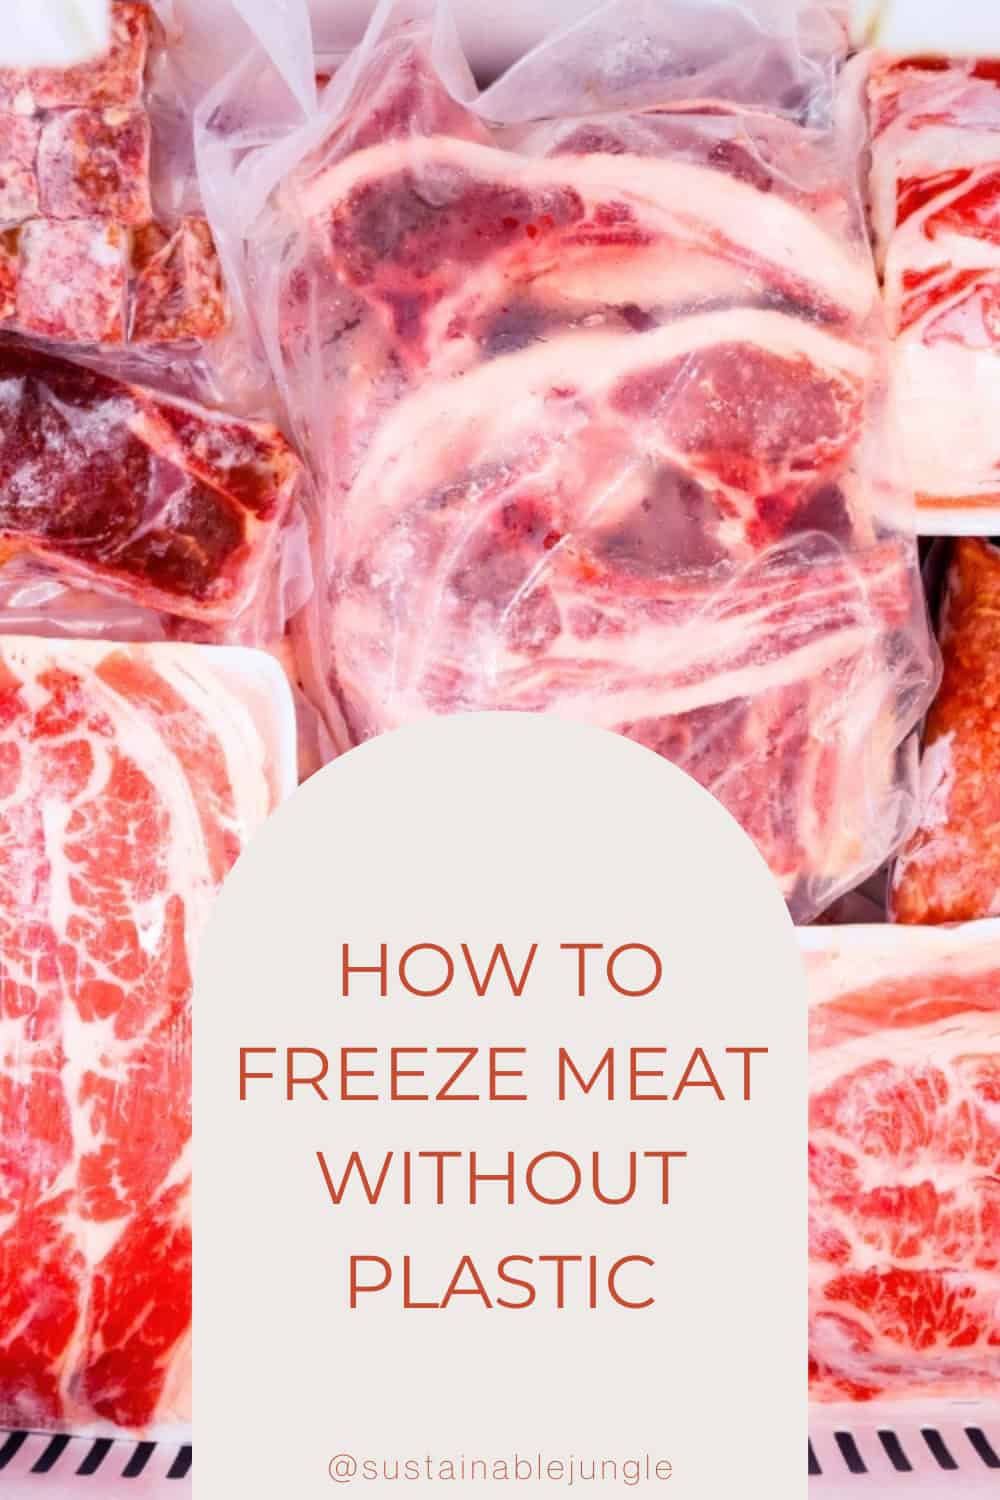 How to Freeze Meat Without Plastic: Beef Up Your Sustainable Food Storage Image by Creativa Images #hottofreezemeatwithoutplastic #bestwaytofreezemeat #howtostoremeatinfreezerwithoutplastic #freezingmeat #plasticfreefreezerstorage #sustainablejungle